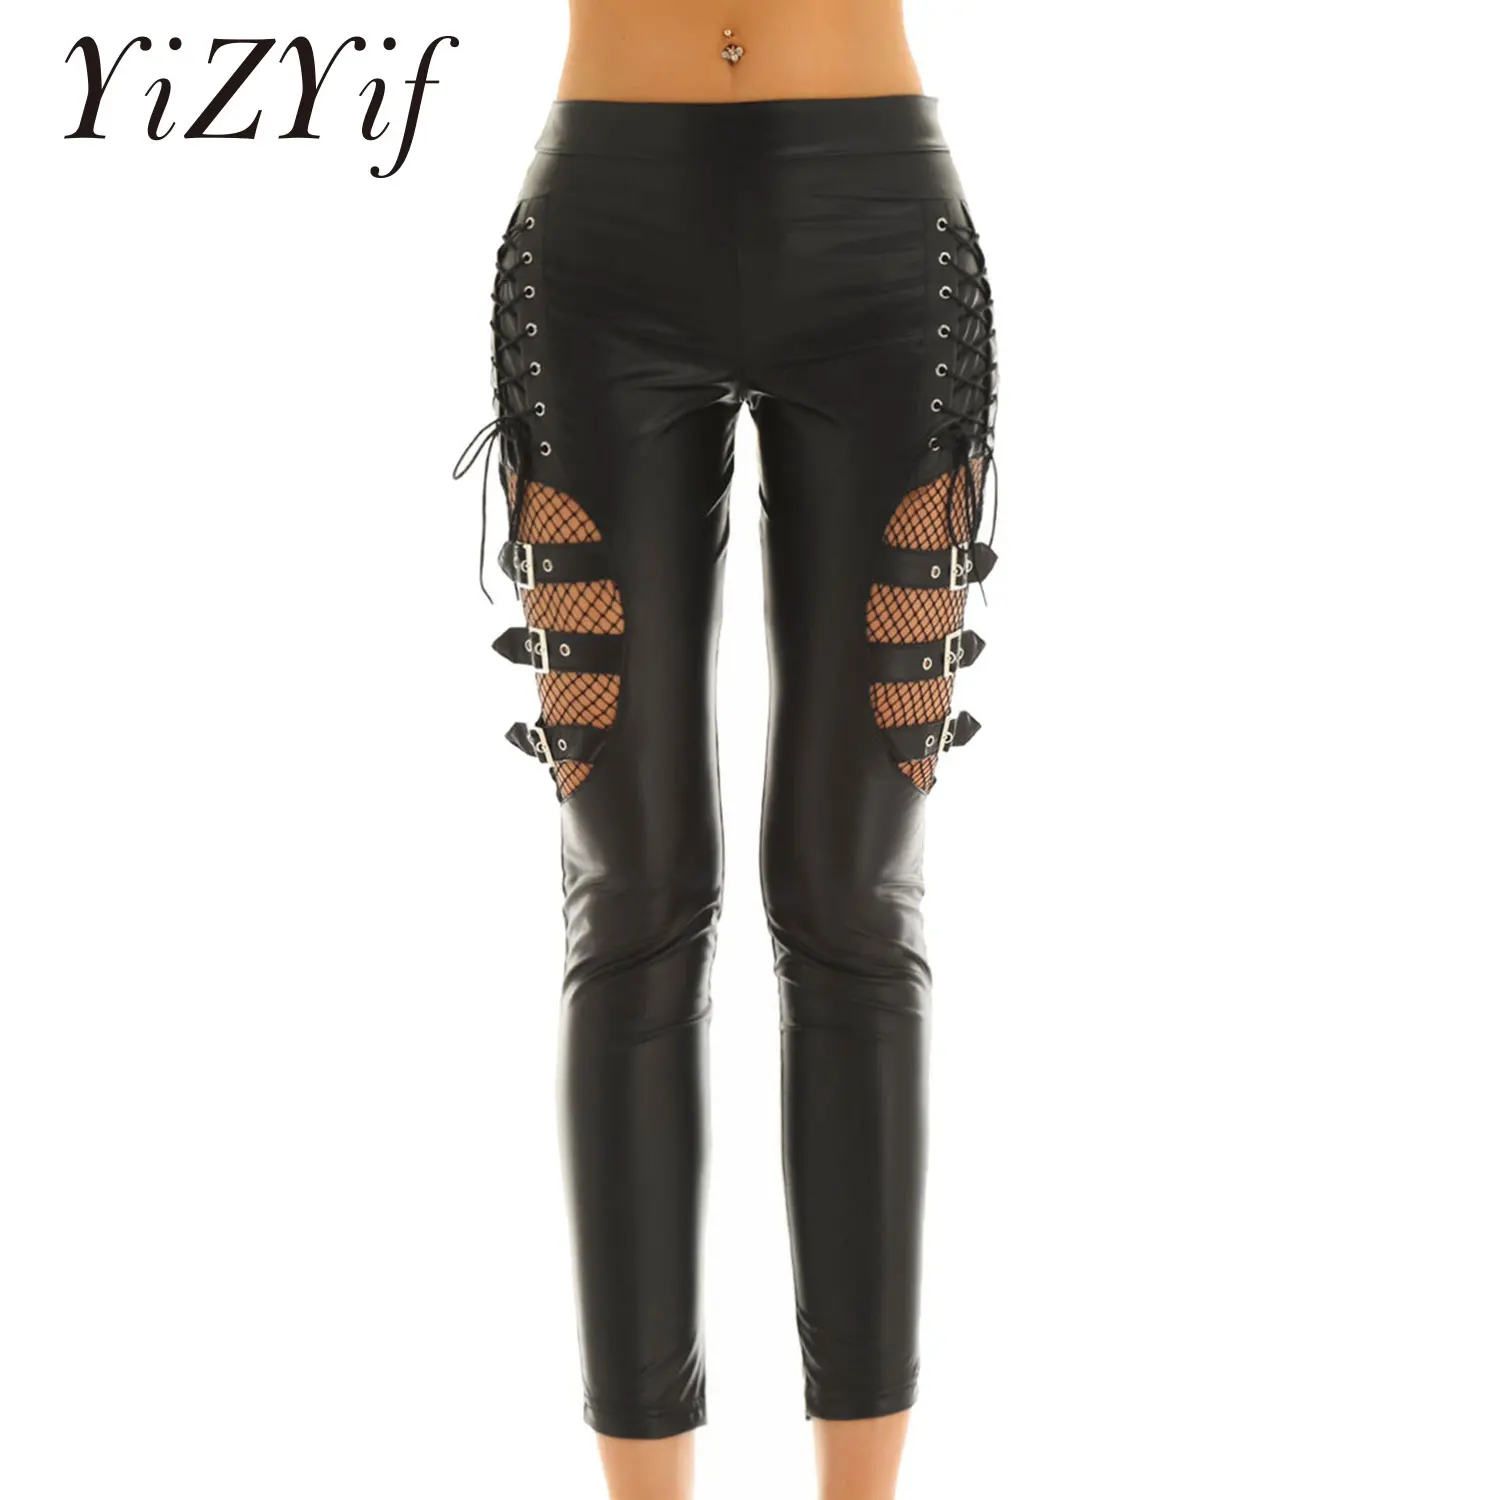 Women Pants Wet Look Faux Leather Mid Waist Fishnet Splice Thigh with Buckles Decoration Side Lace Up Stretchy Legging Trousers